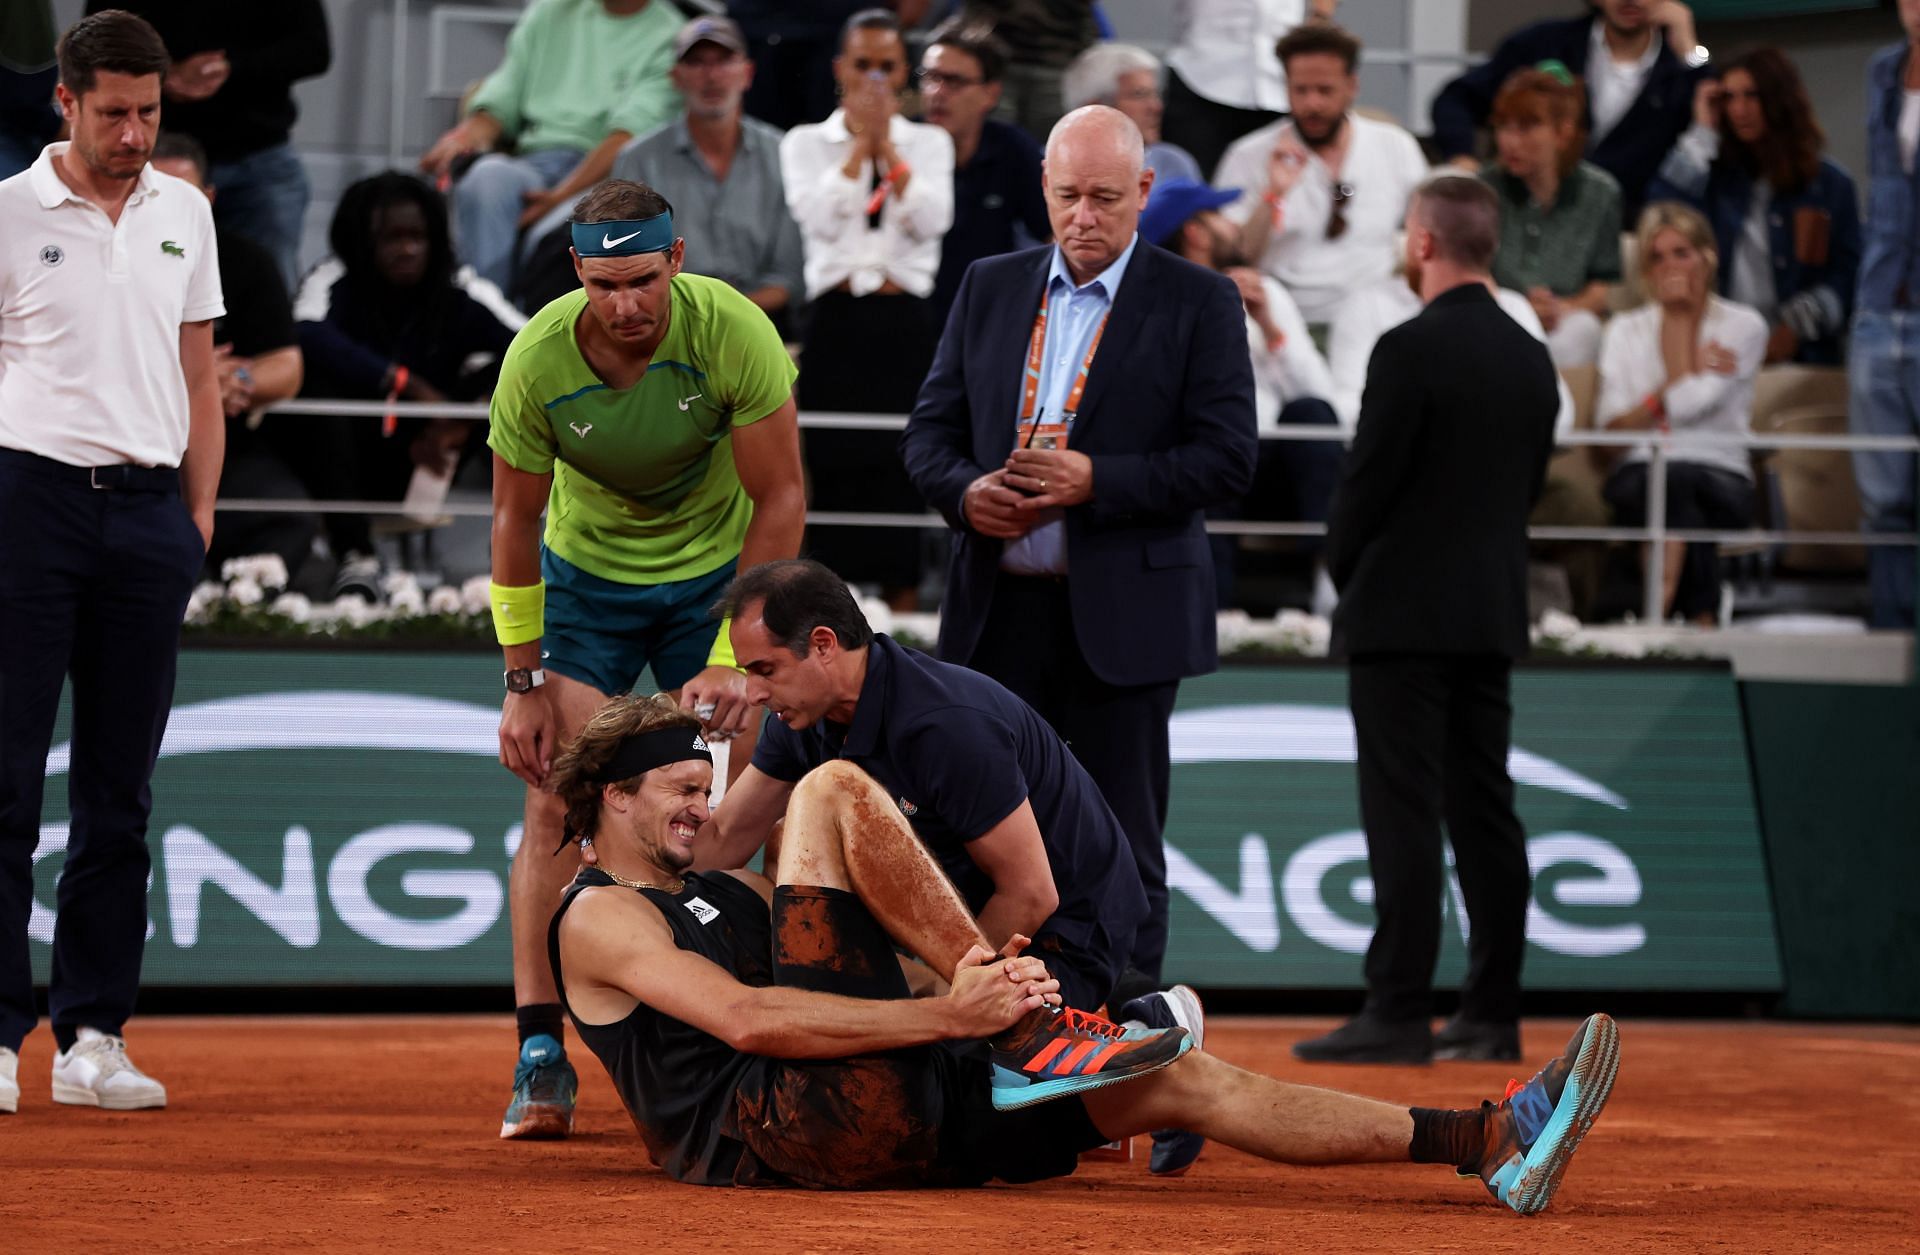 Alexander Zverev suffered an ankle injury in the 2022 French Open SF